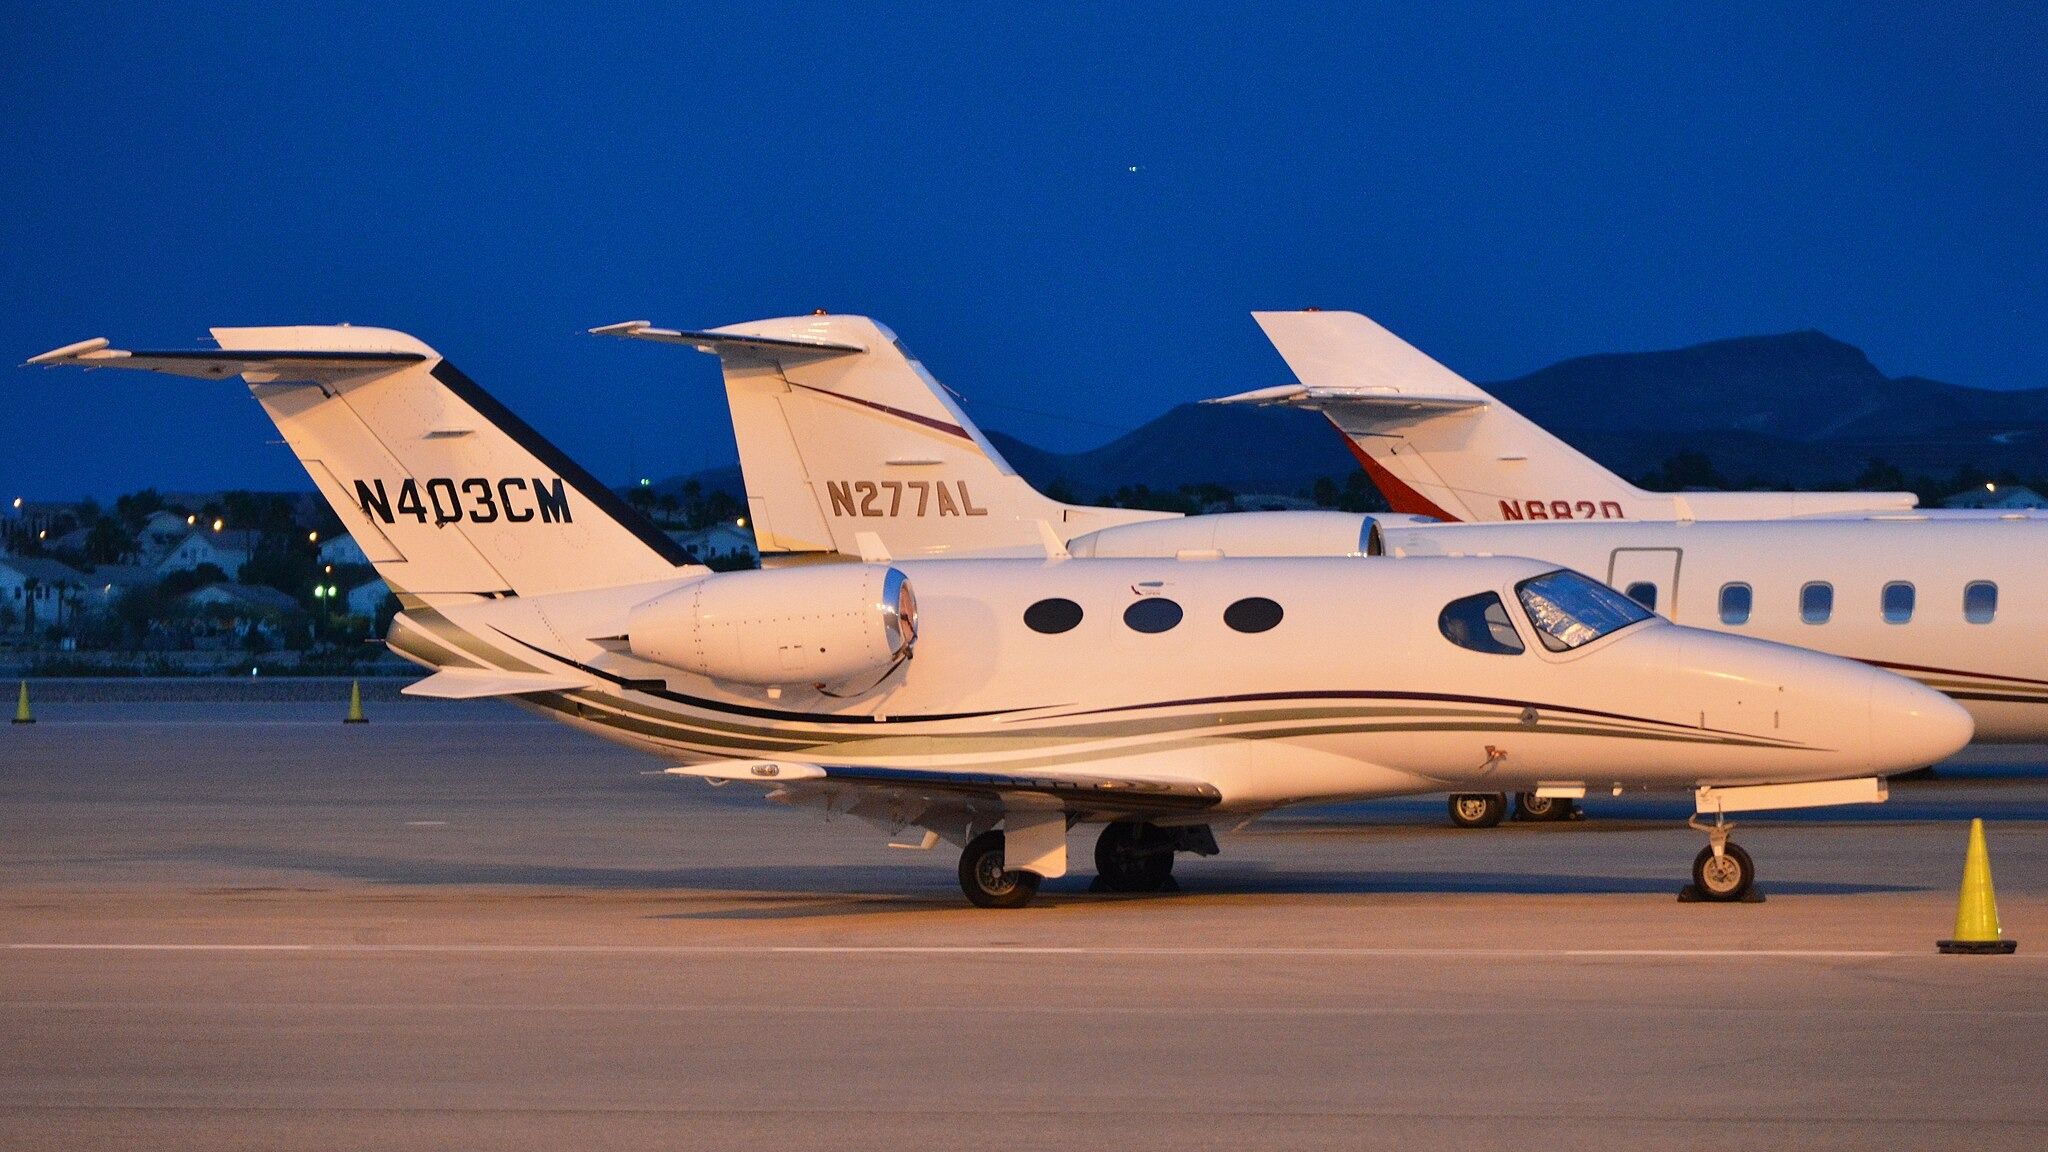 Cessna Citation Mustang parked at an airport